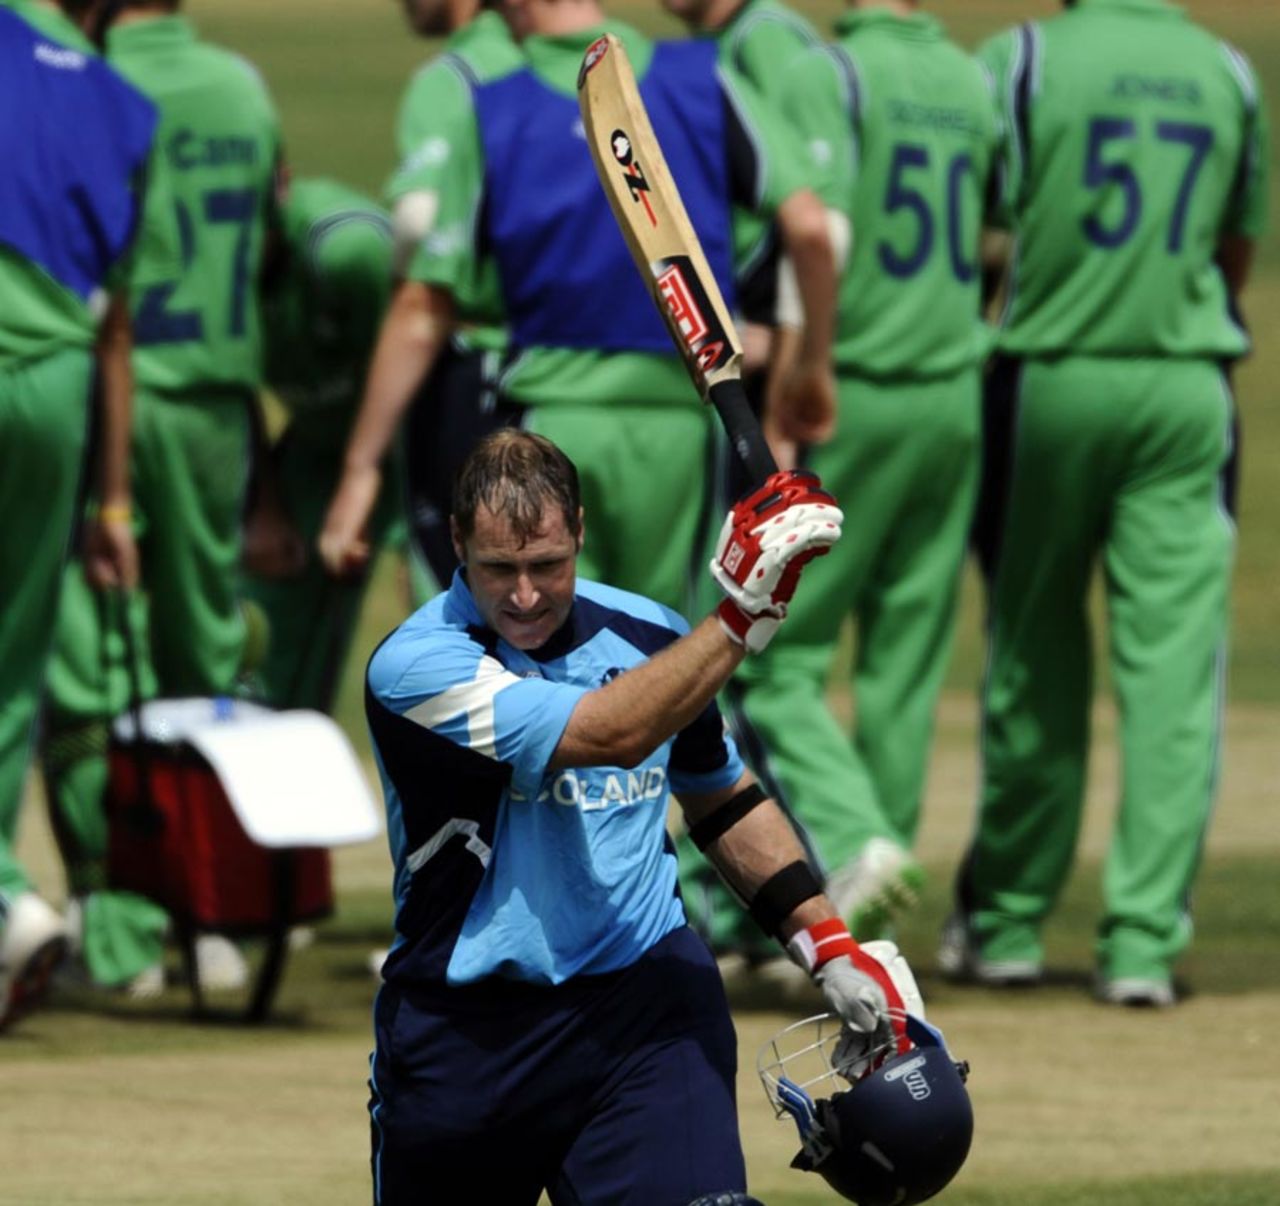 Scotland's Neil McCallum is dejected after missing a half-century, Ireland v Scotland, ICC WCL Division 1, Voorburg, July 5, 2010